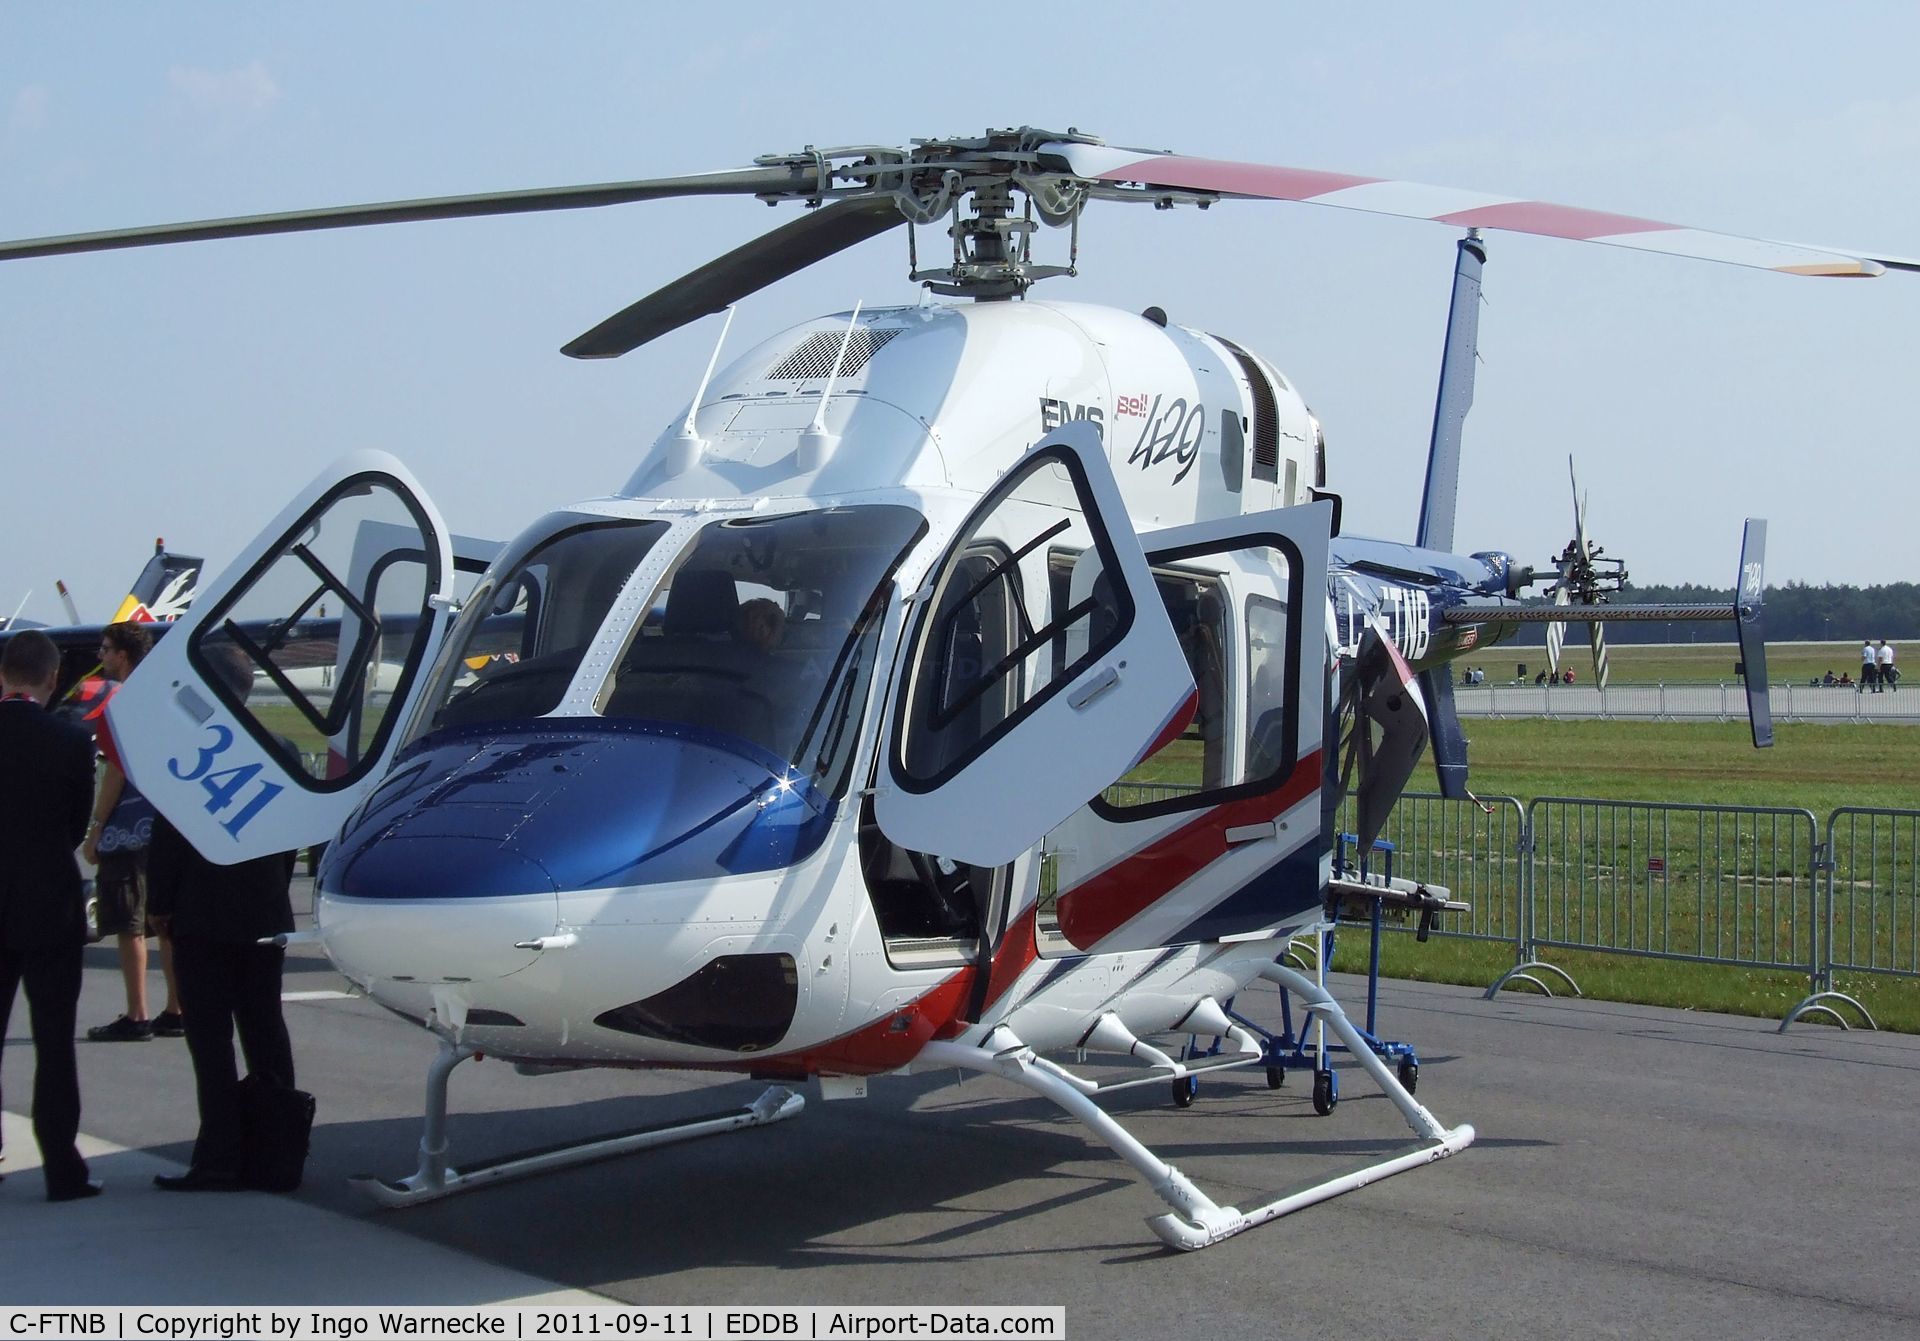 C-FTNB, 2008 Bell 429 GlobalRanger C/N 57002, Bell 429 in EMS configuration at the ILA 2012, Berlin